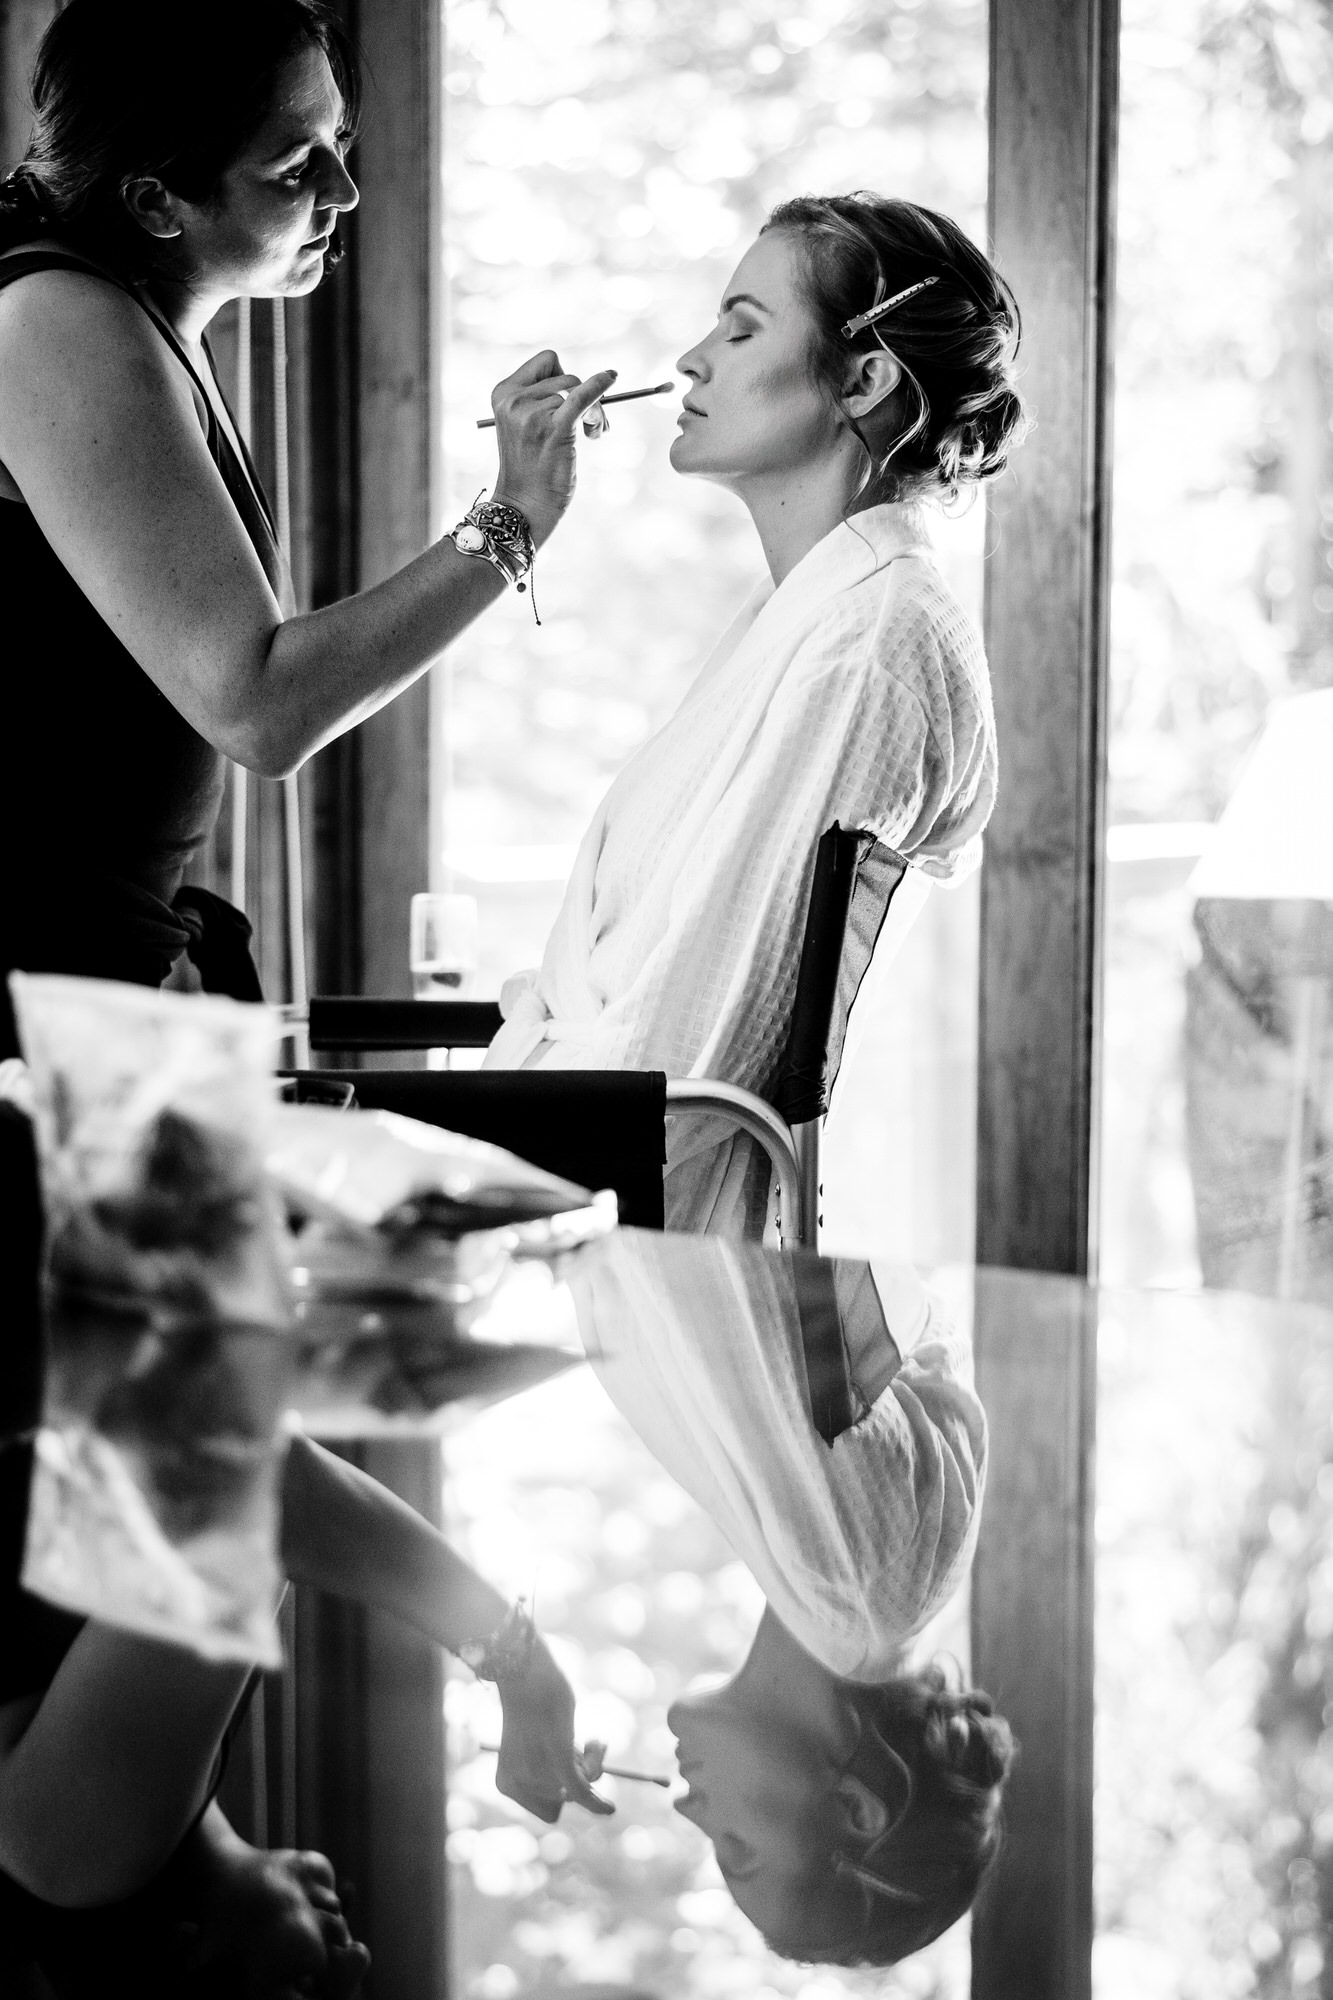 An artist applies makeup for a bride getting married in Incline Village.